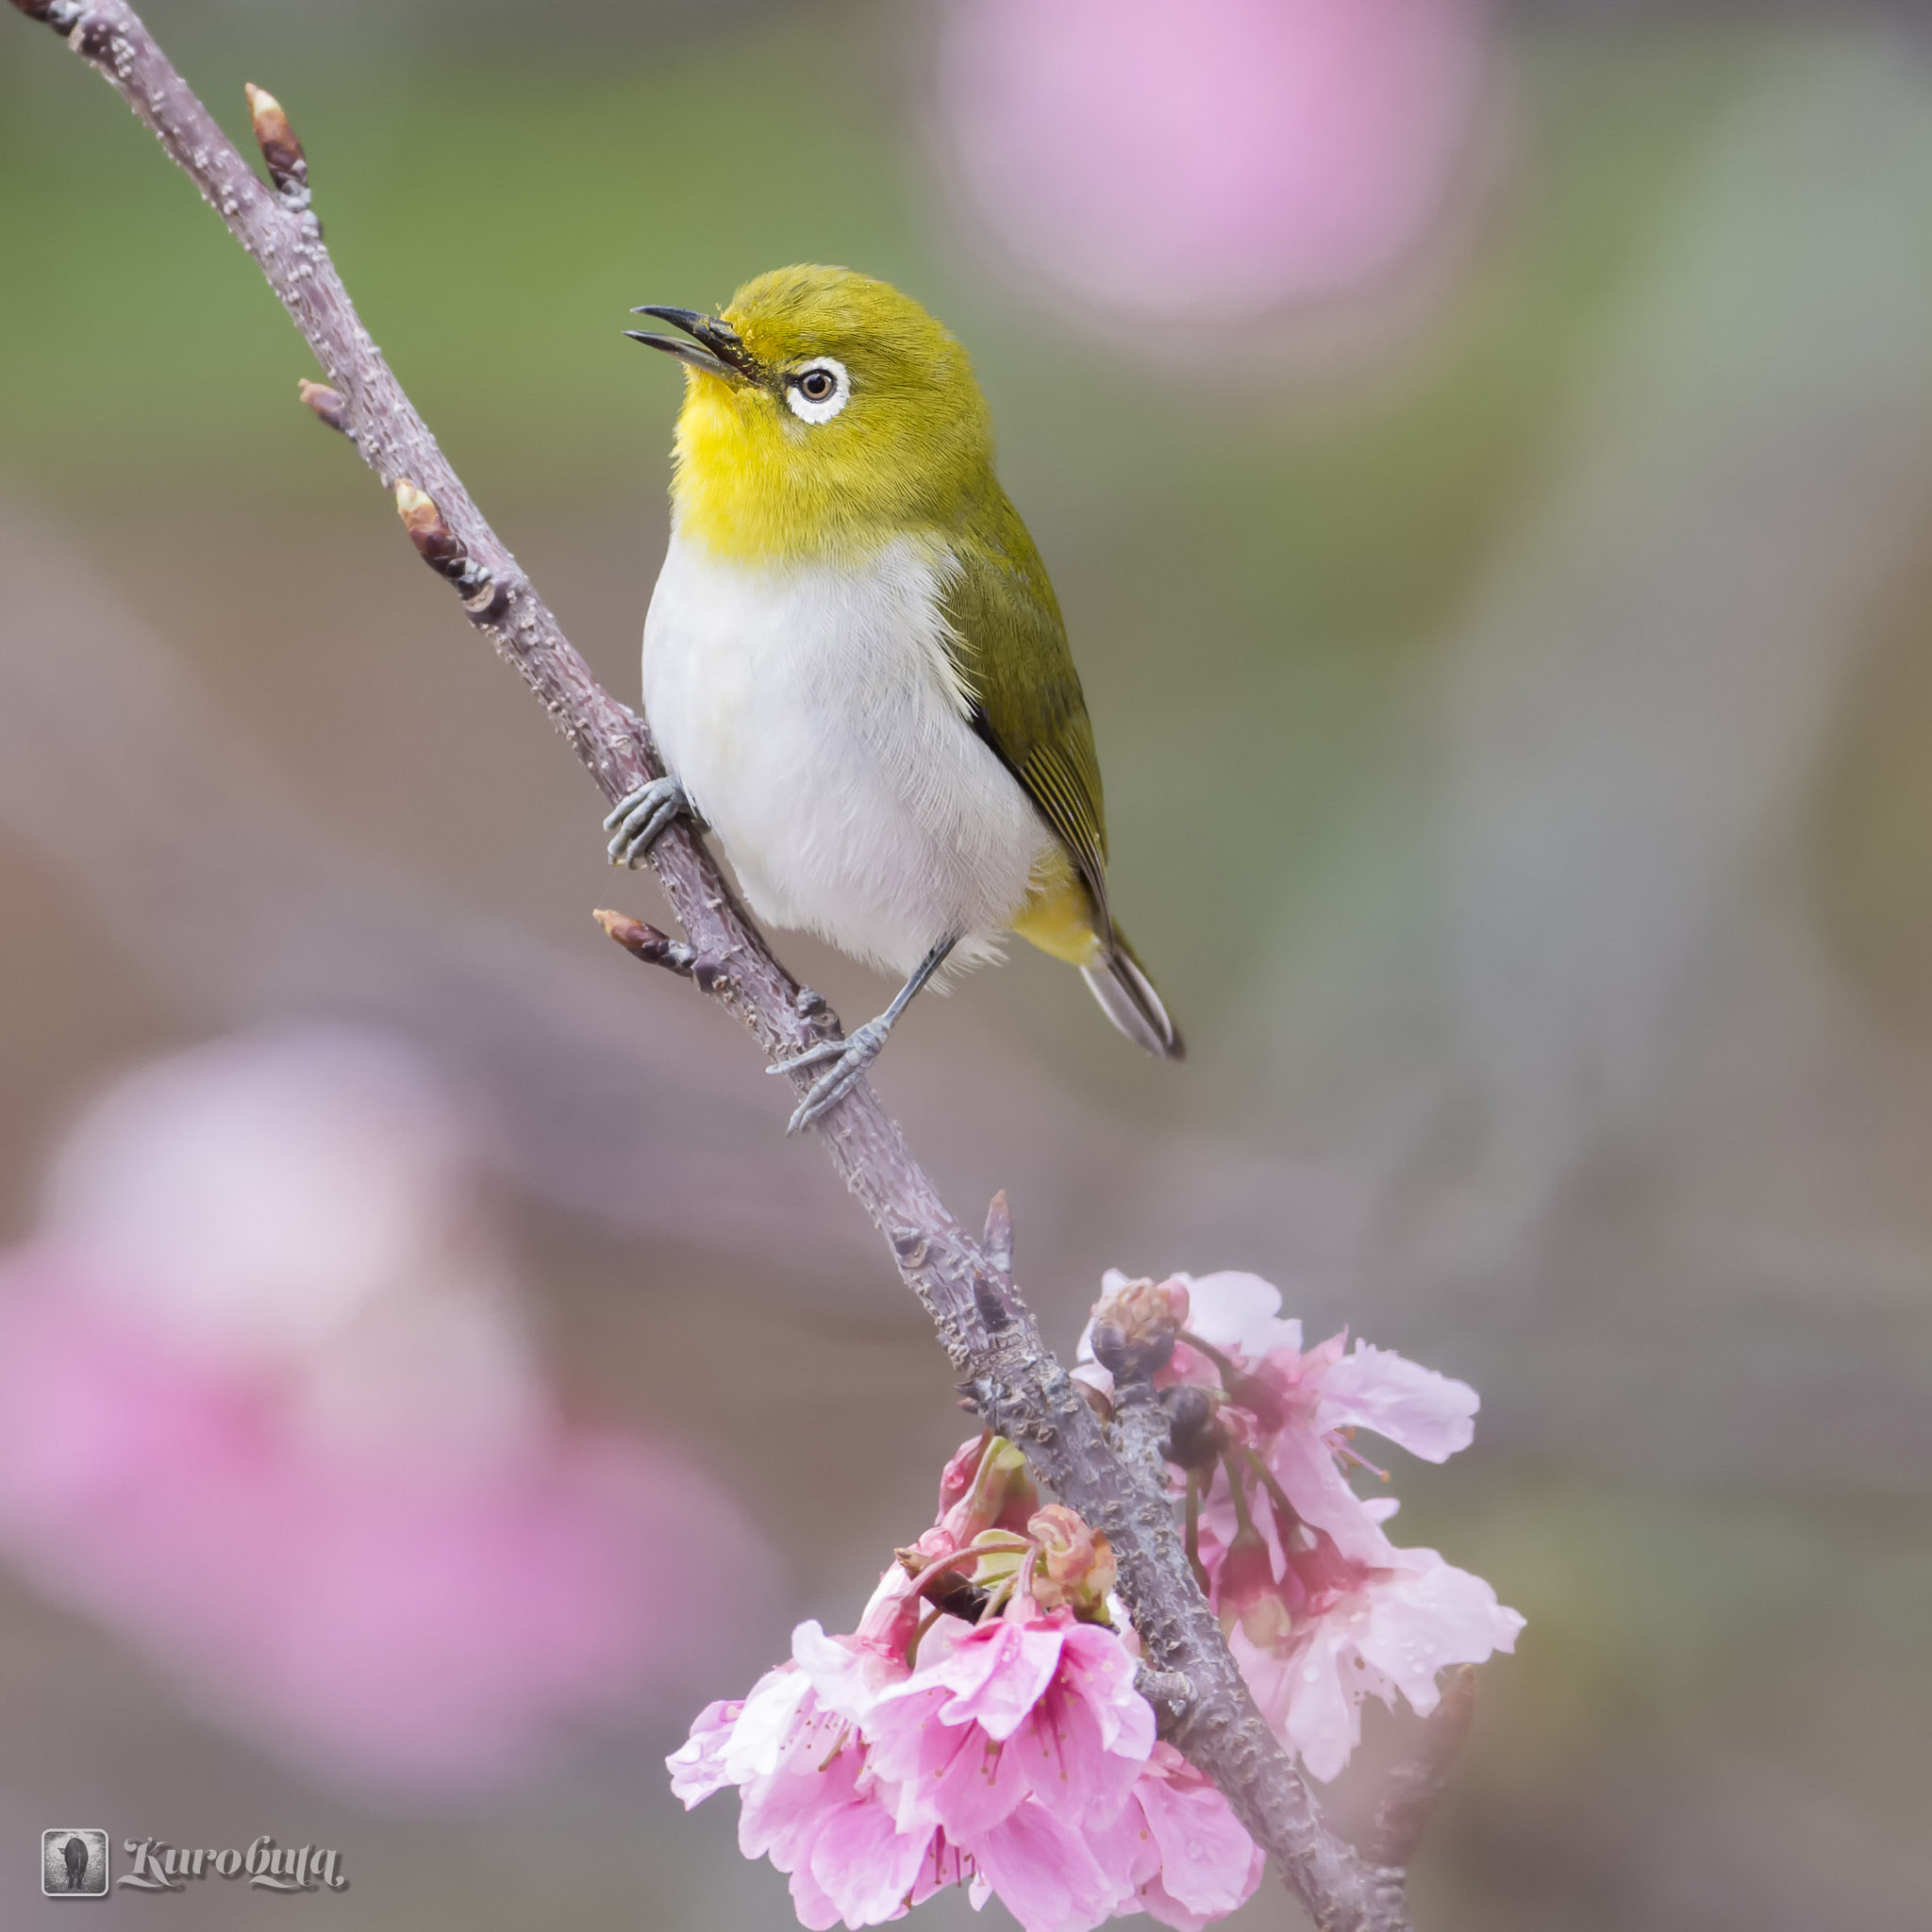 Pentax K-5 IIs sample photo. Cherry blossoms and small birds photography